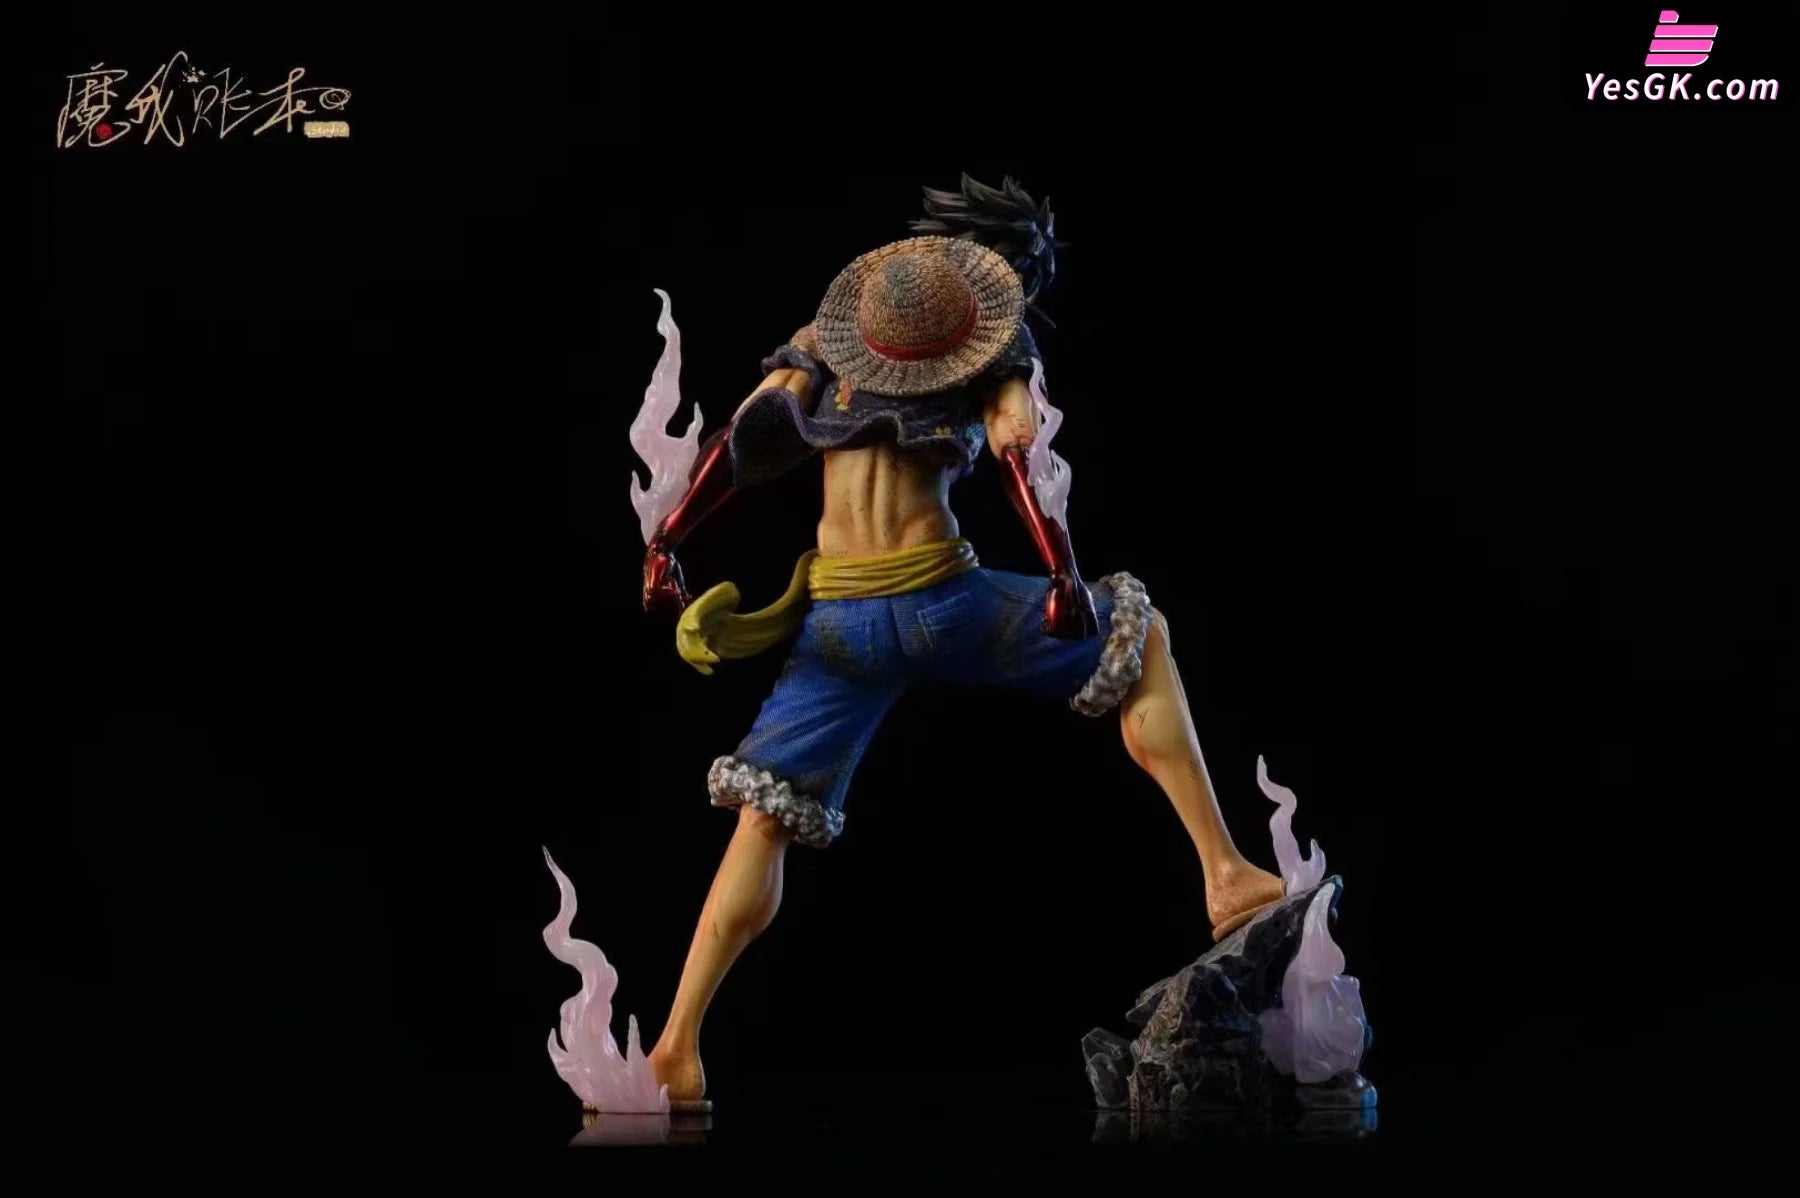 One Piece Monkey D. Luffy Tokushima Articles Resin Statue - Magic Book Studio [Pre-Order]